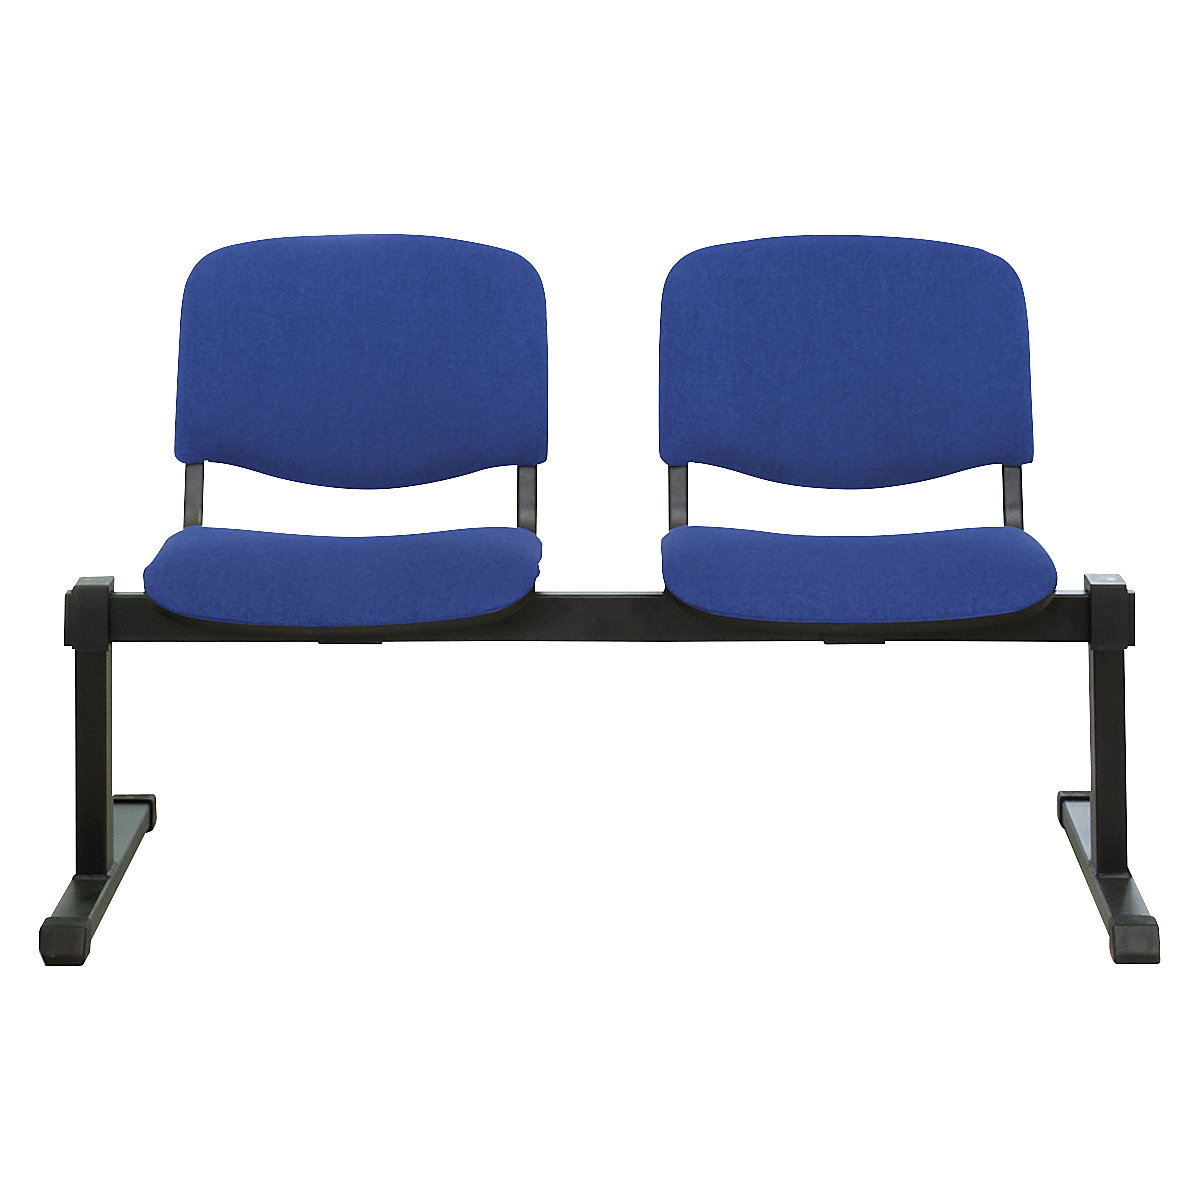 Bench unit, without table, 2 seats, blue upholstery-3